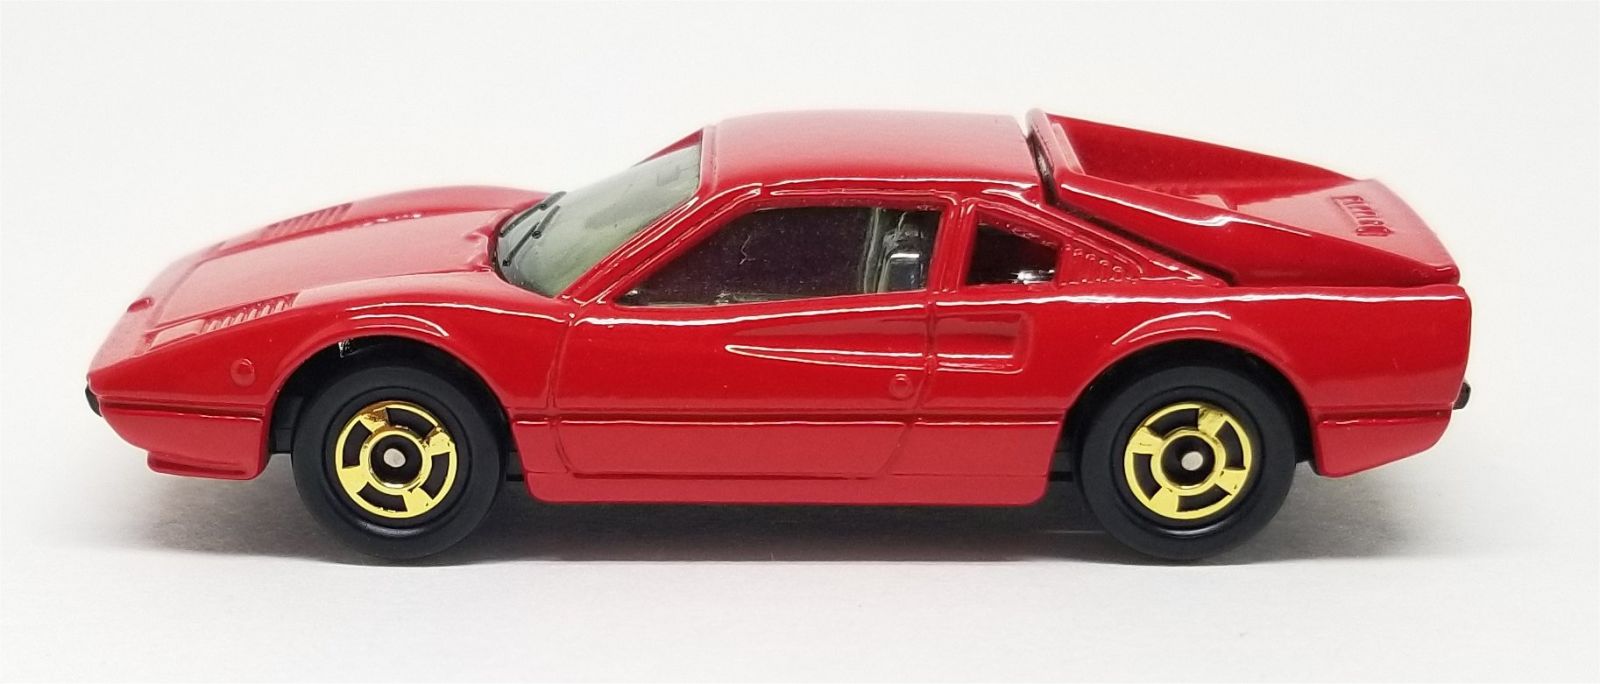 Illustration for article titled [REVIEW] Tomica Ferrari 308 GTB